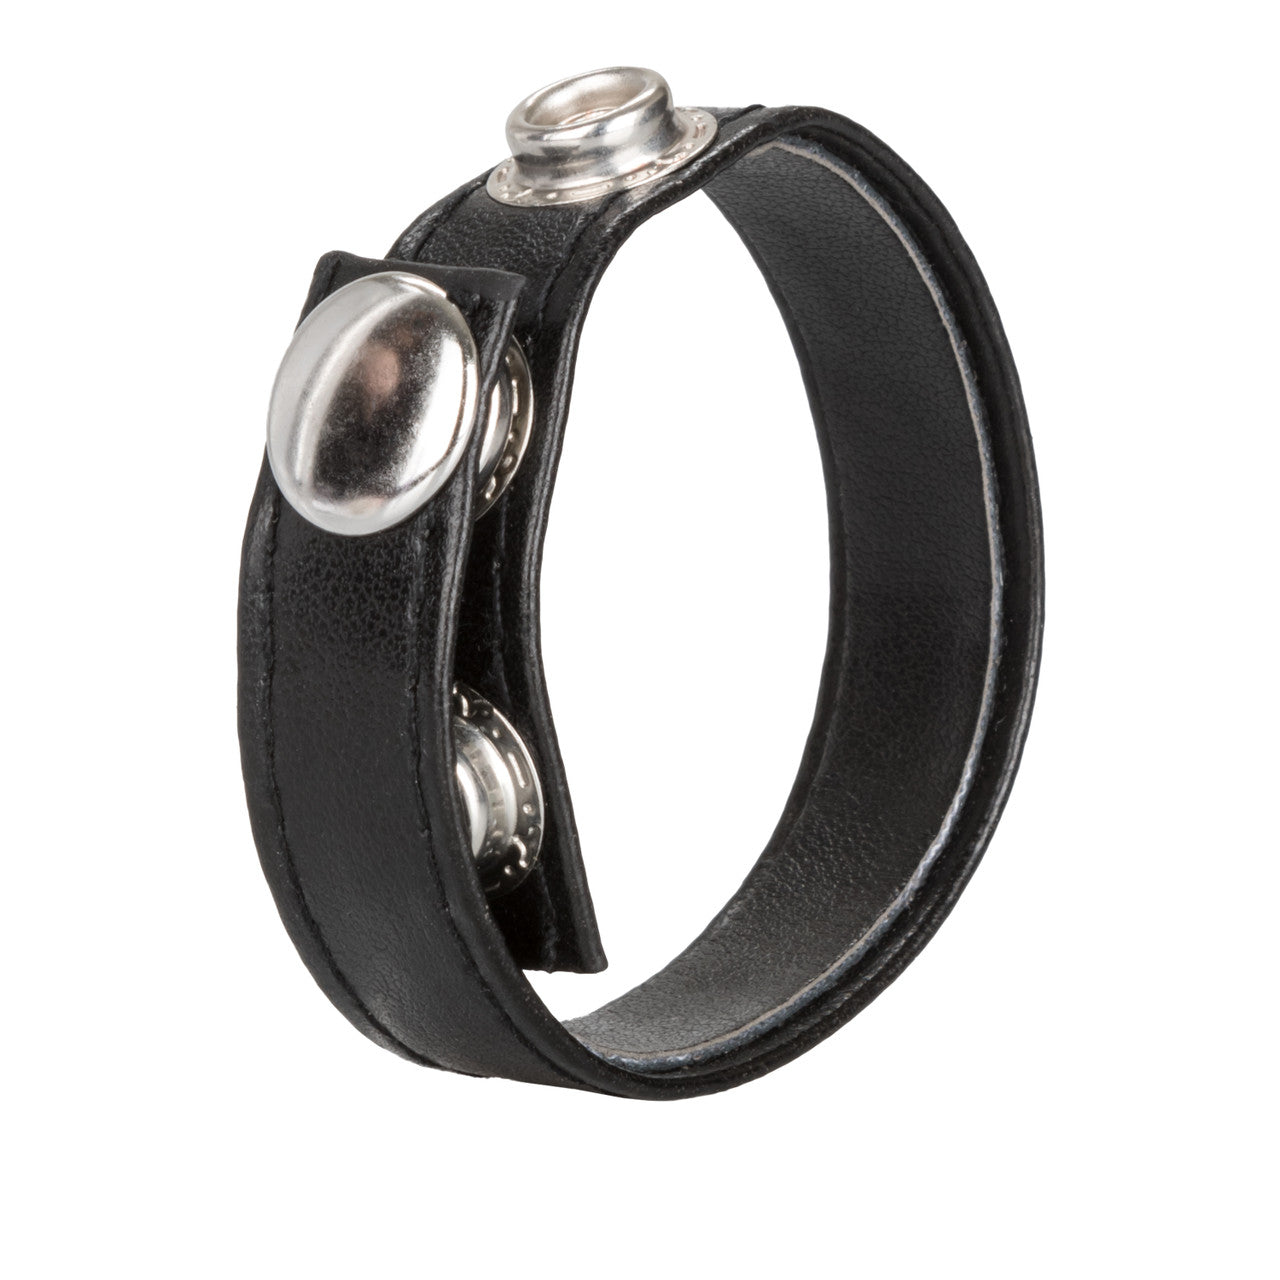 Leather 3 Snap Ring